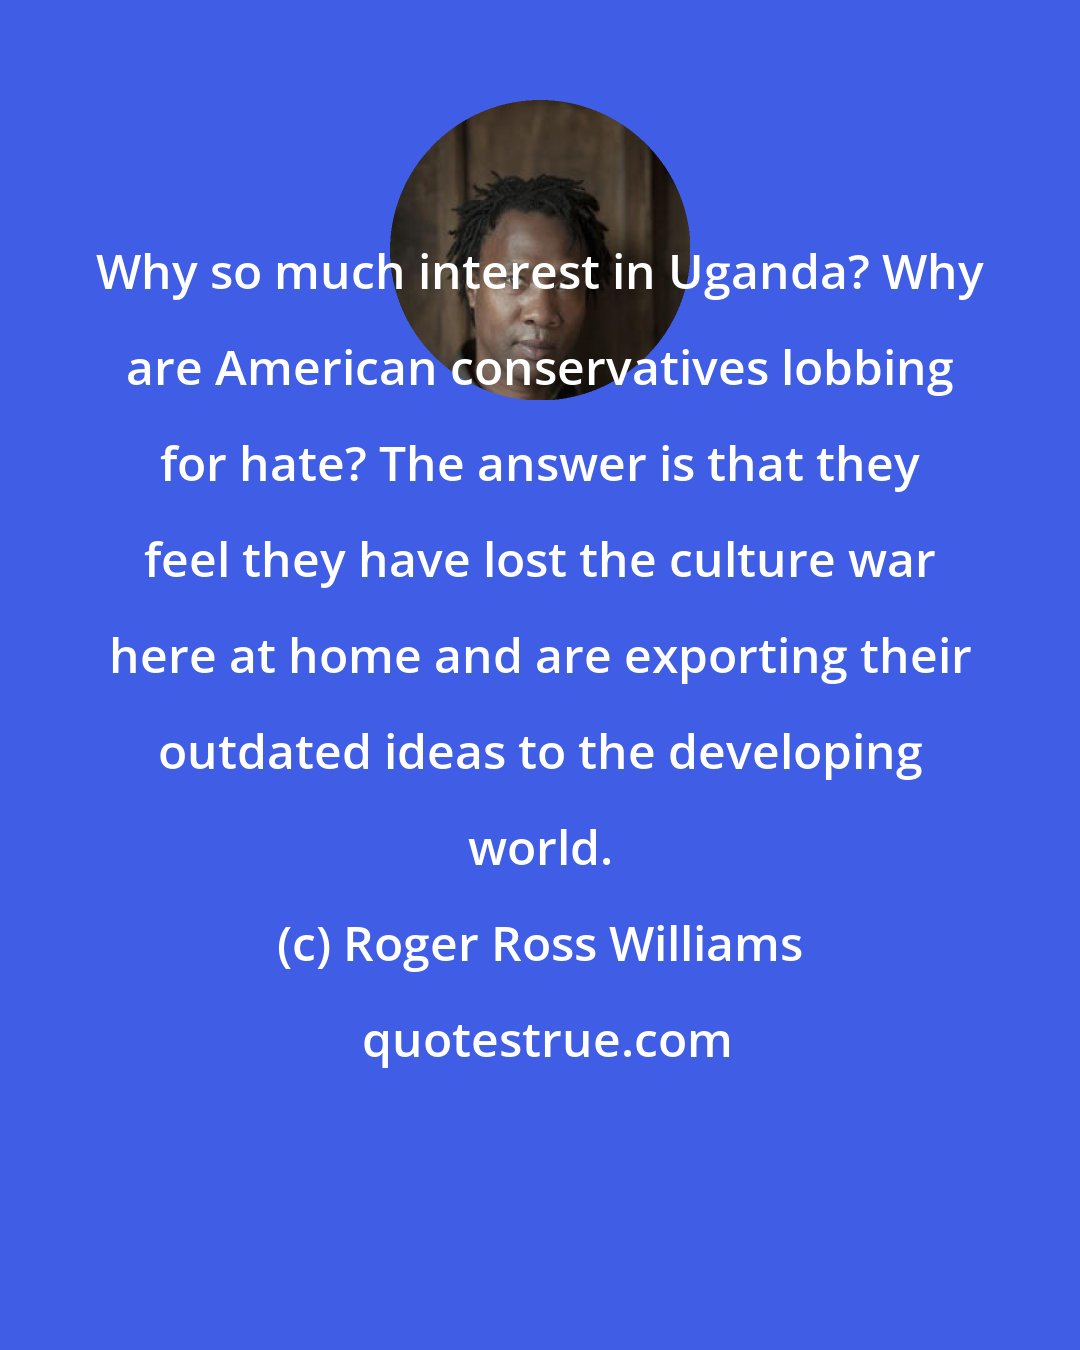 Roger Ross Williams: Why so much interest in Uganda? Why are American conservatives lobbing for hate? The answer is that they feel they have lost the culture war here at home and are exporting their outdated ideas to the developing world.